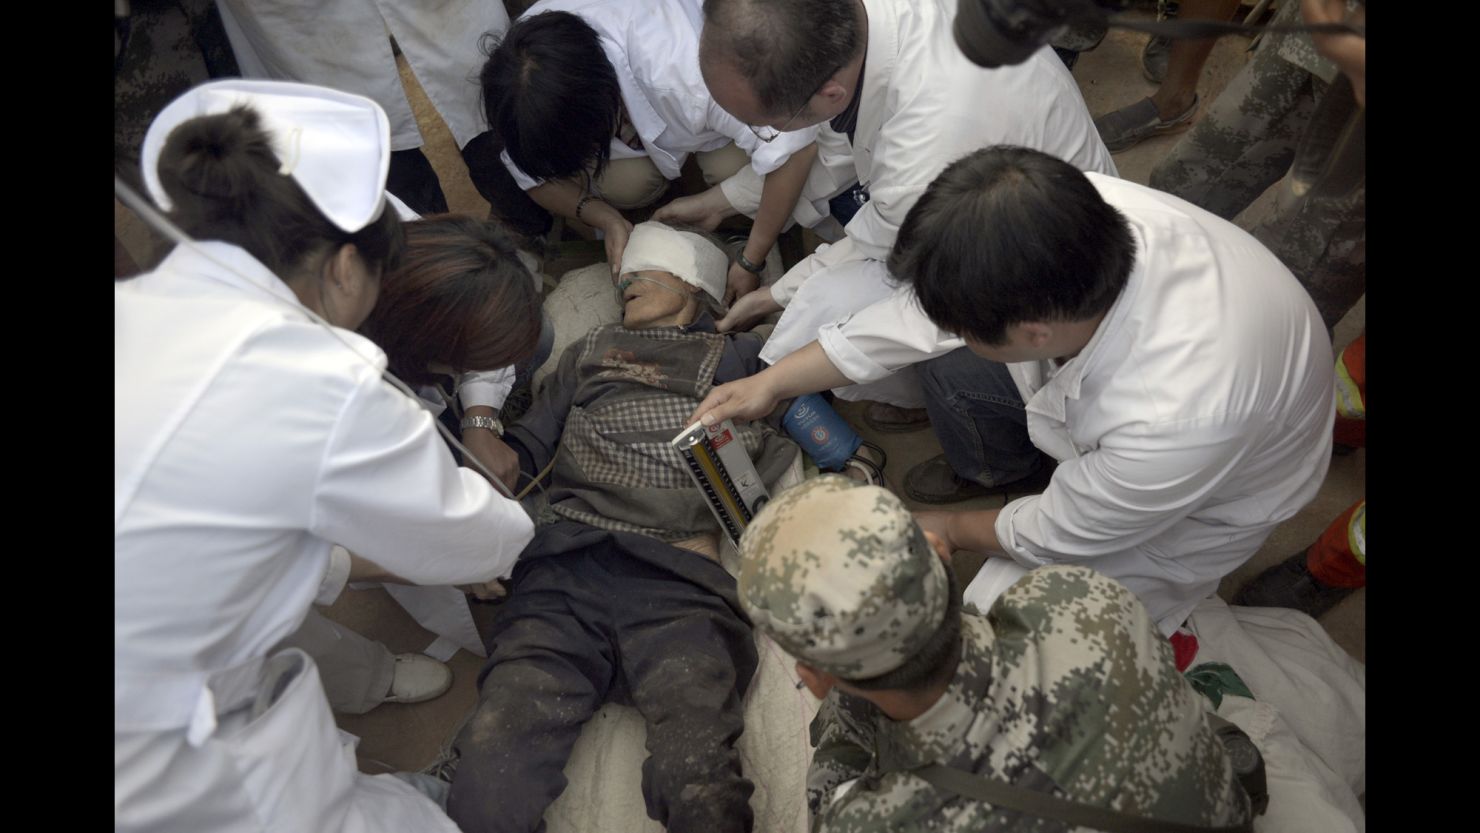 Survivor Xiong Zhengfen, 88, is treated by medical personnel Tuesday, August 5, after being buried under rubble for 50 hours.